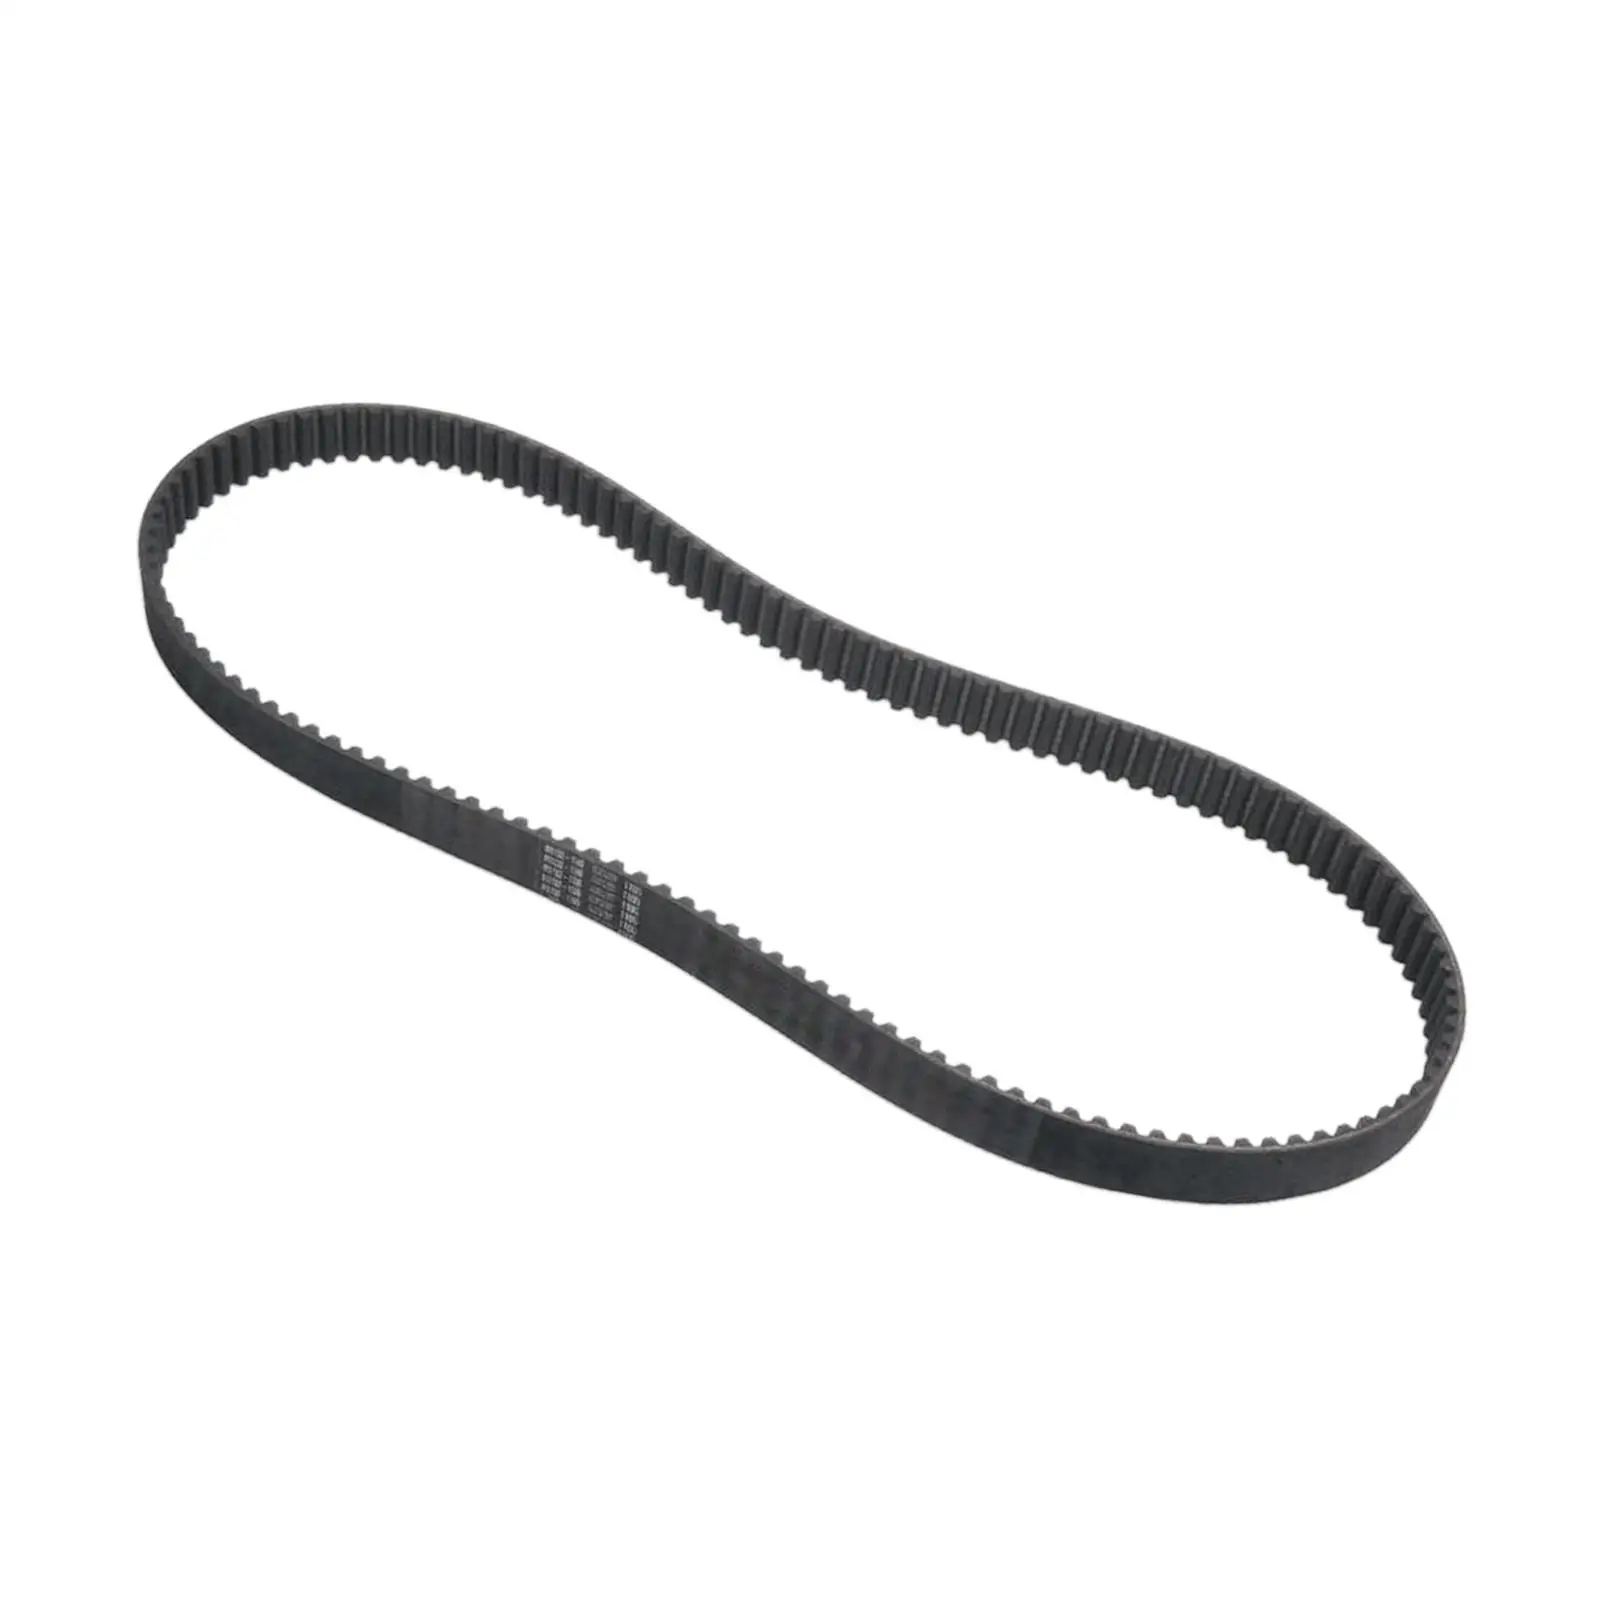 

Drive Rear Belt, 40015-90, Spare Parts, Durable, Premium, Accessories High Performance Replaces 60-58-418 for Motorcycle